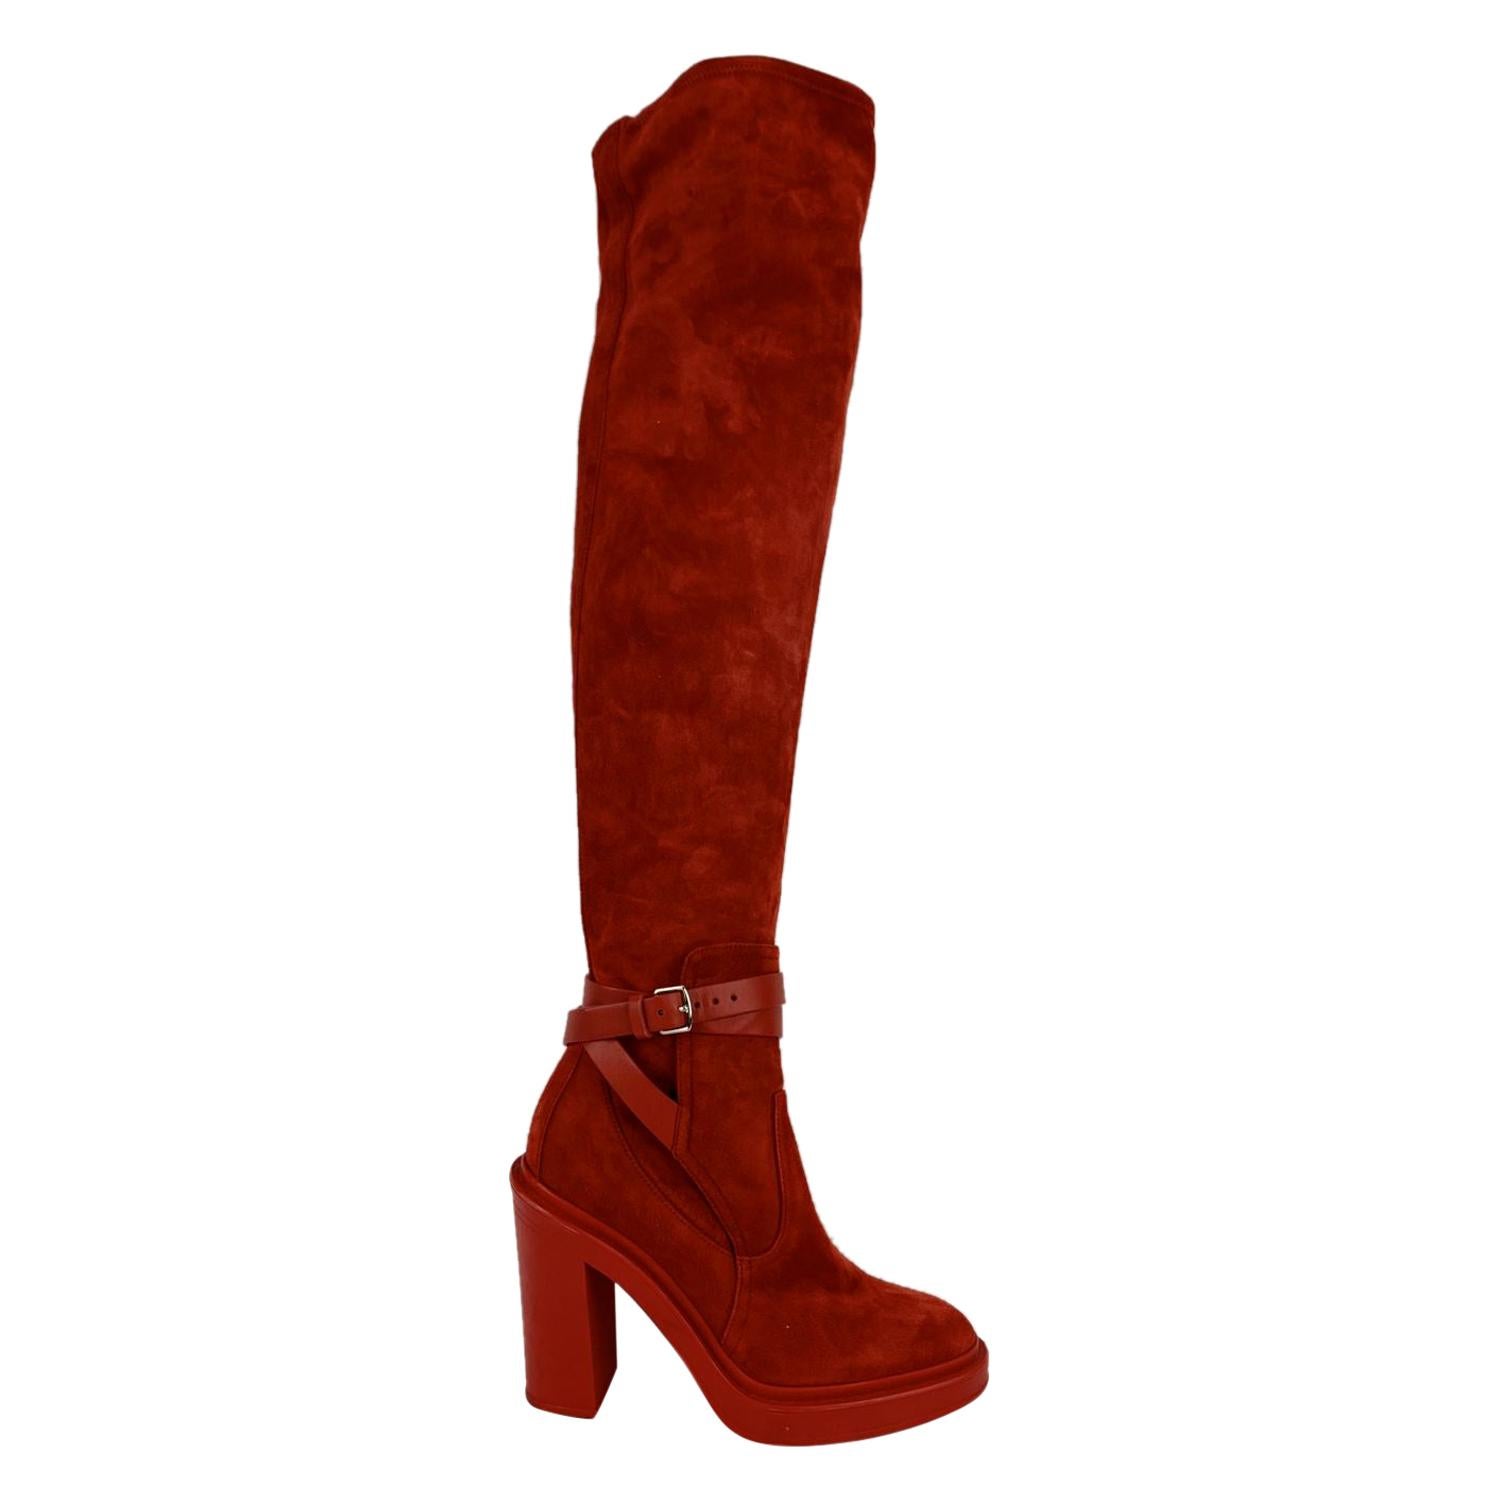 Hermes 2018 Red Suede Selena Over The Knee Boots Size 36